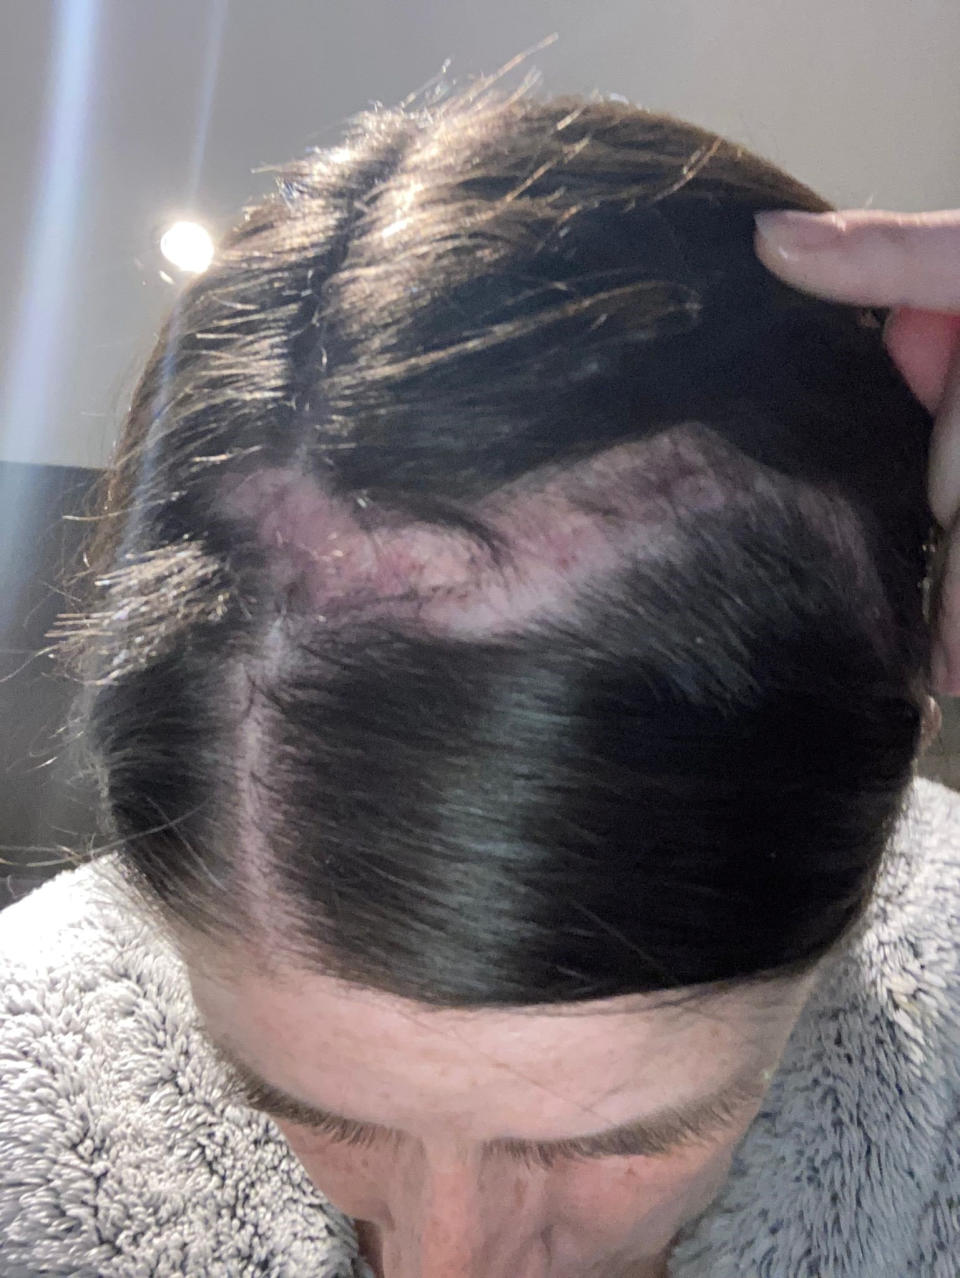 Kirsty Drury&#39;s scar one month after surgery. (SWNS)